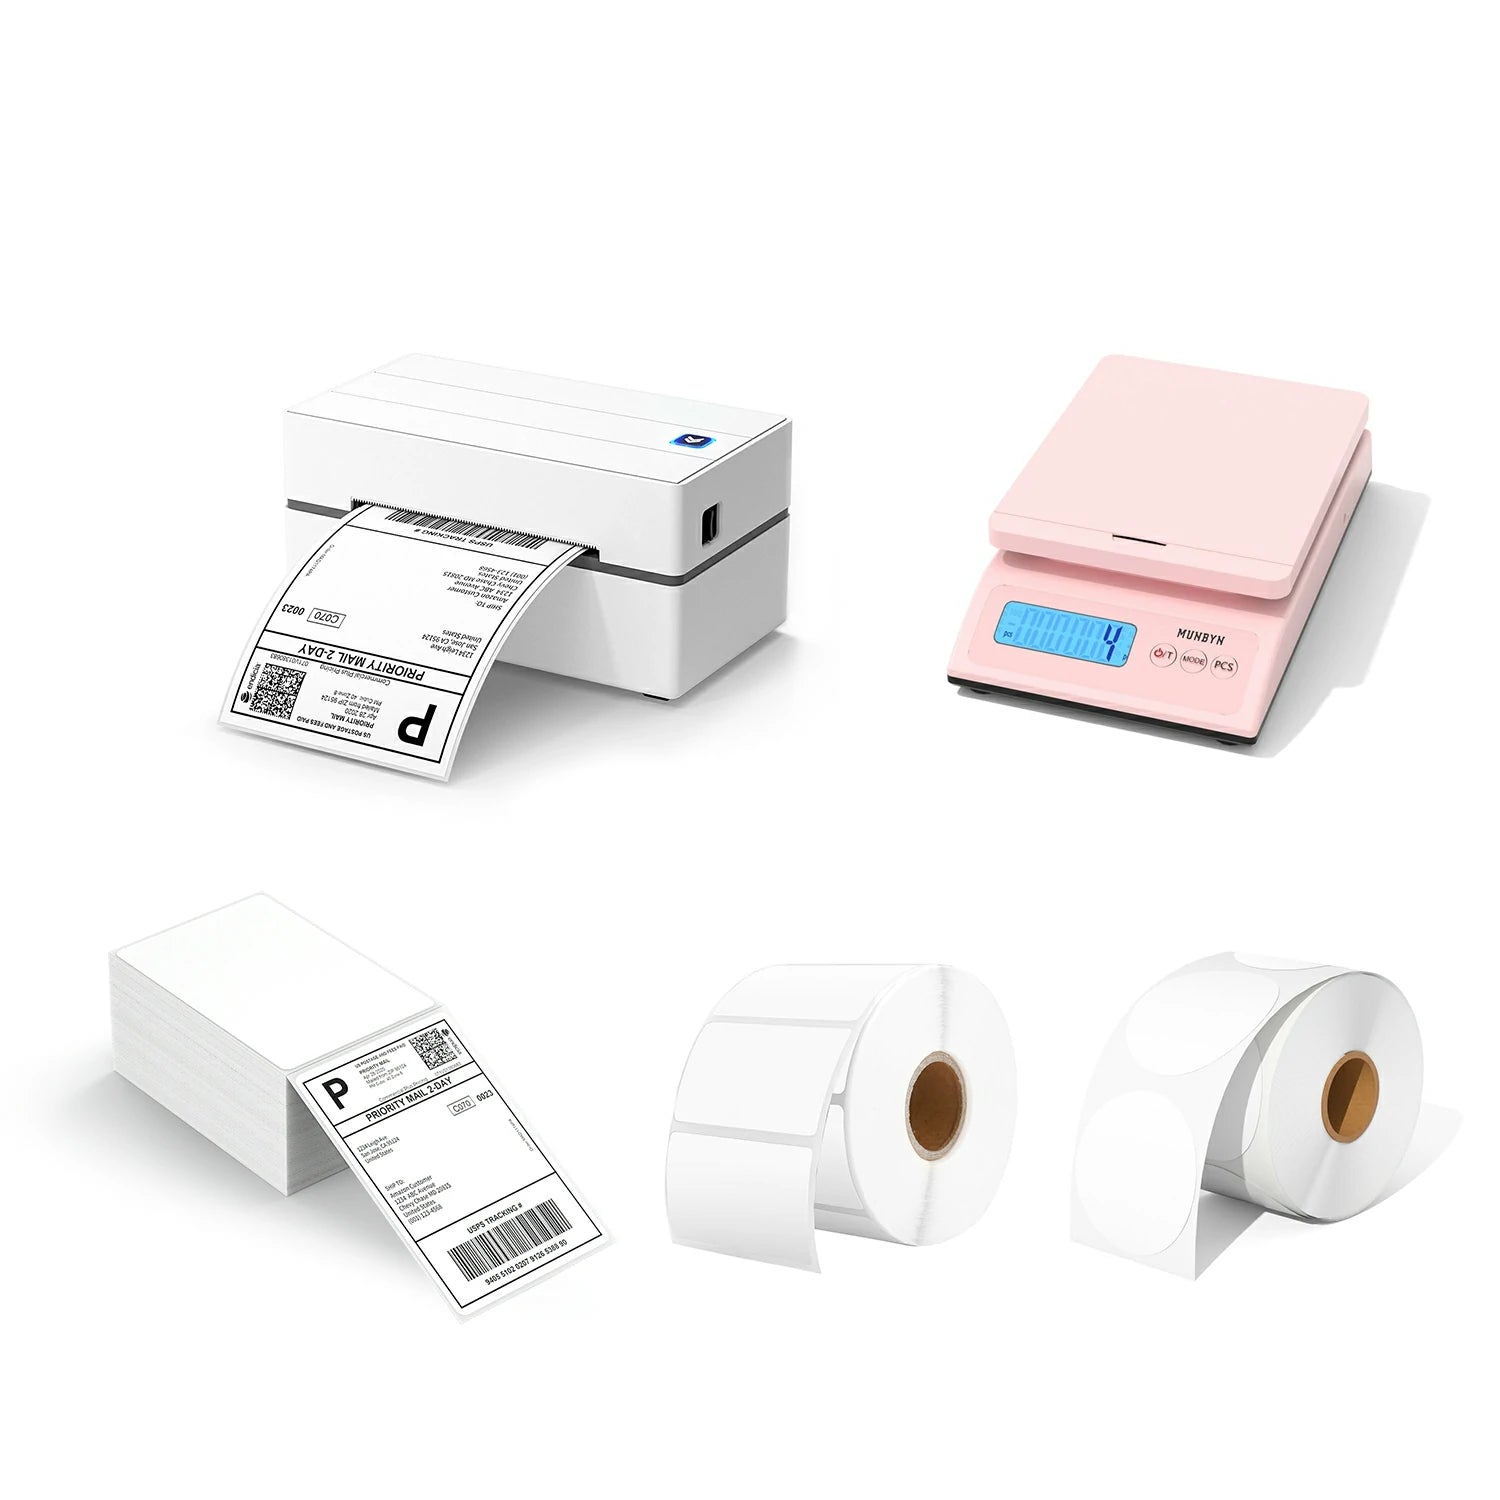 The MUNBYN 130 thermal printer kit includes a USB thermal label printer, a stack of shipping labels, two rolls of blank labels, and a pink shipping scale.